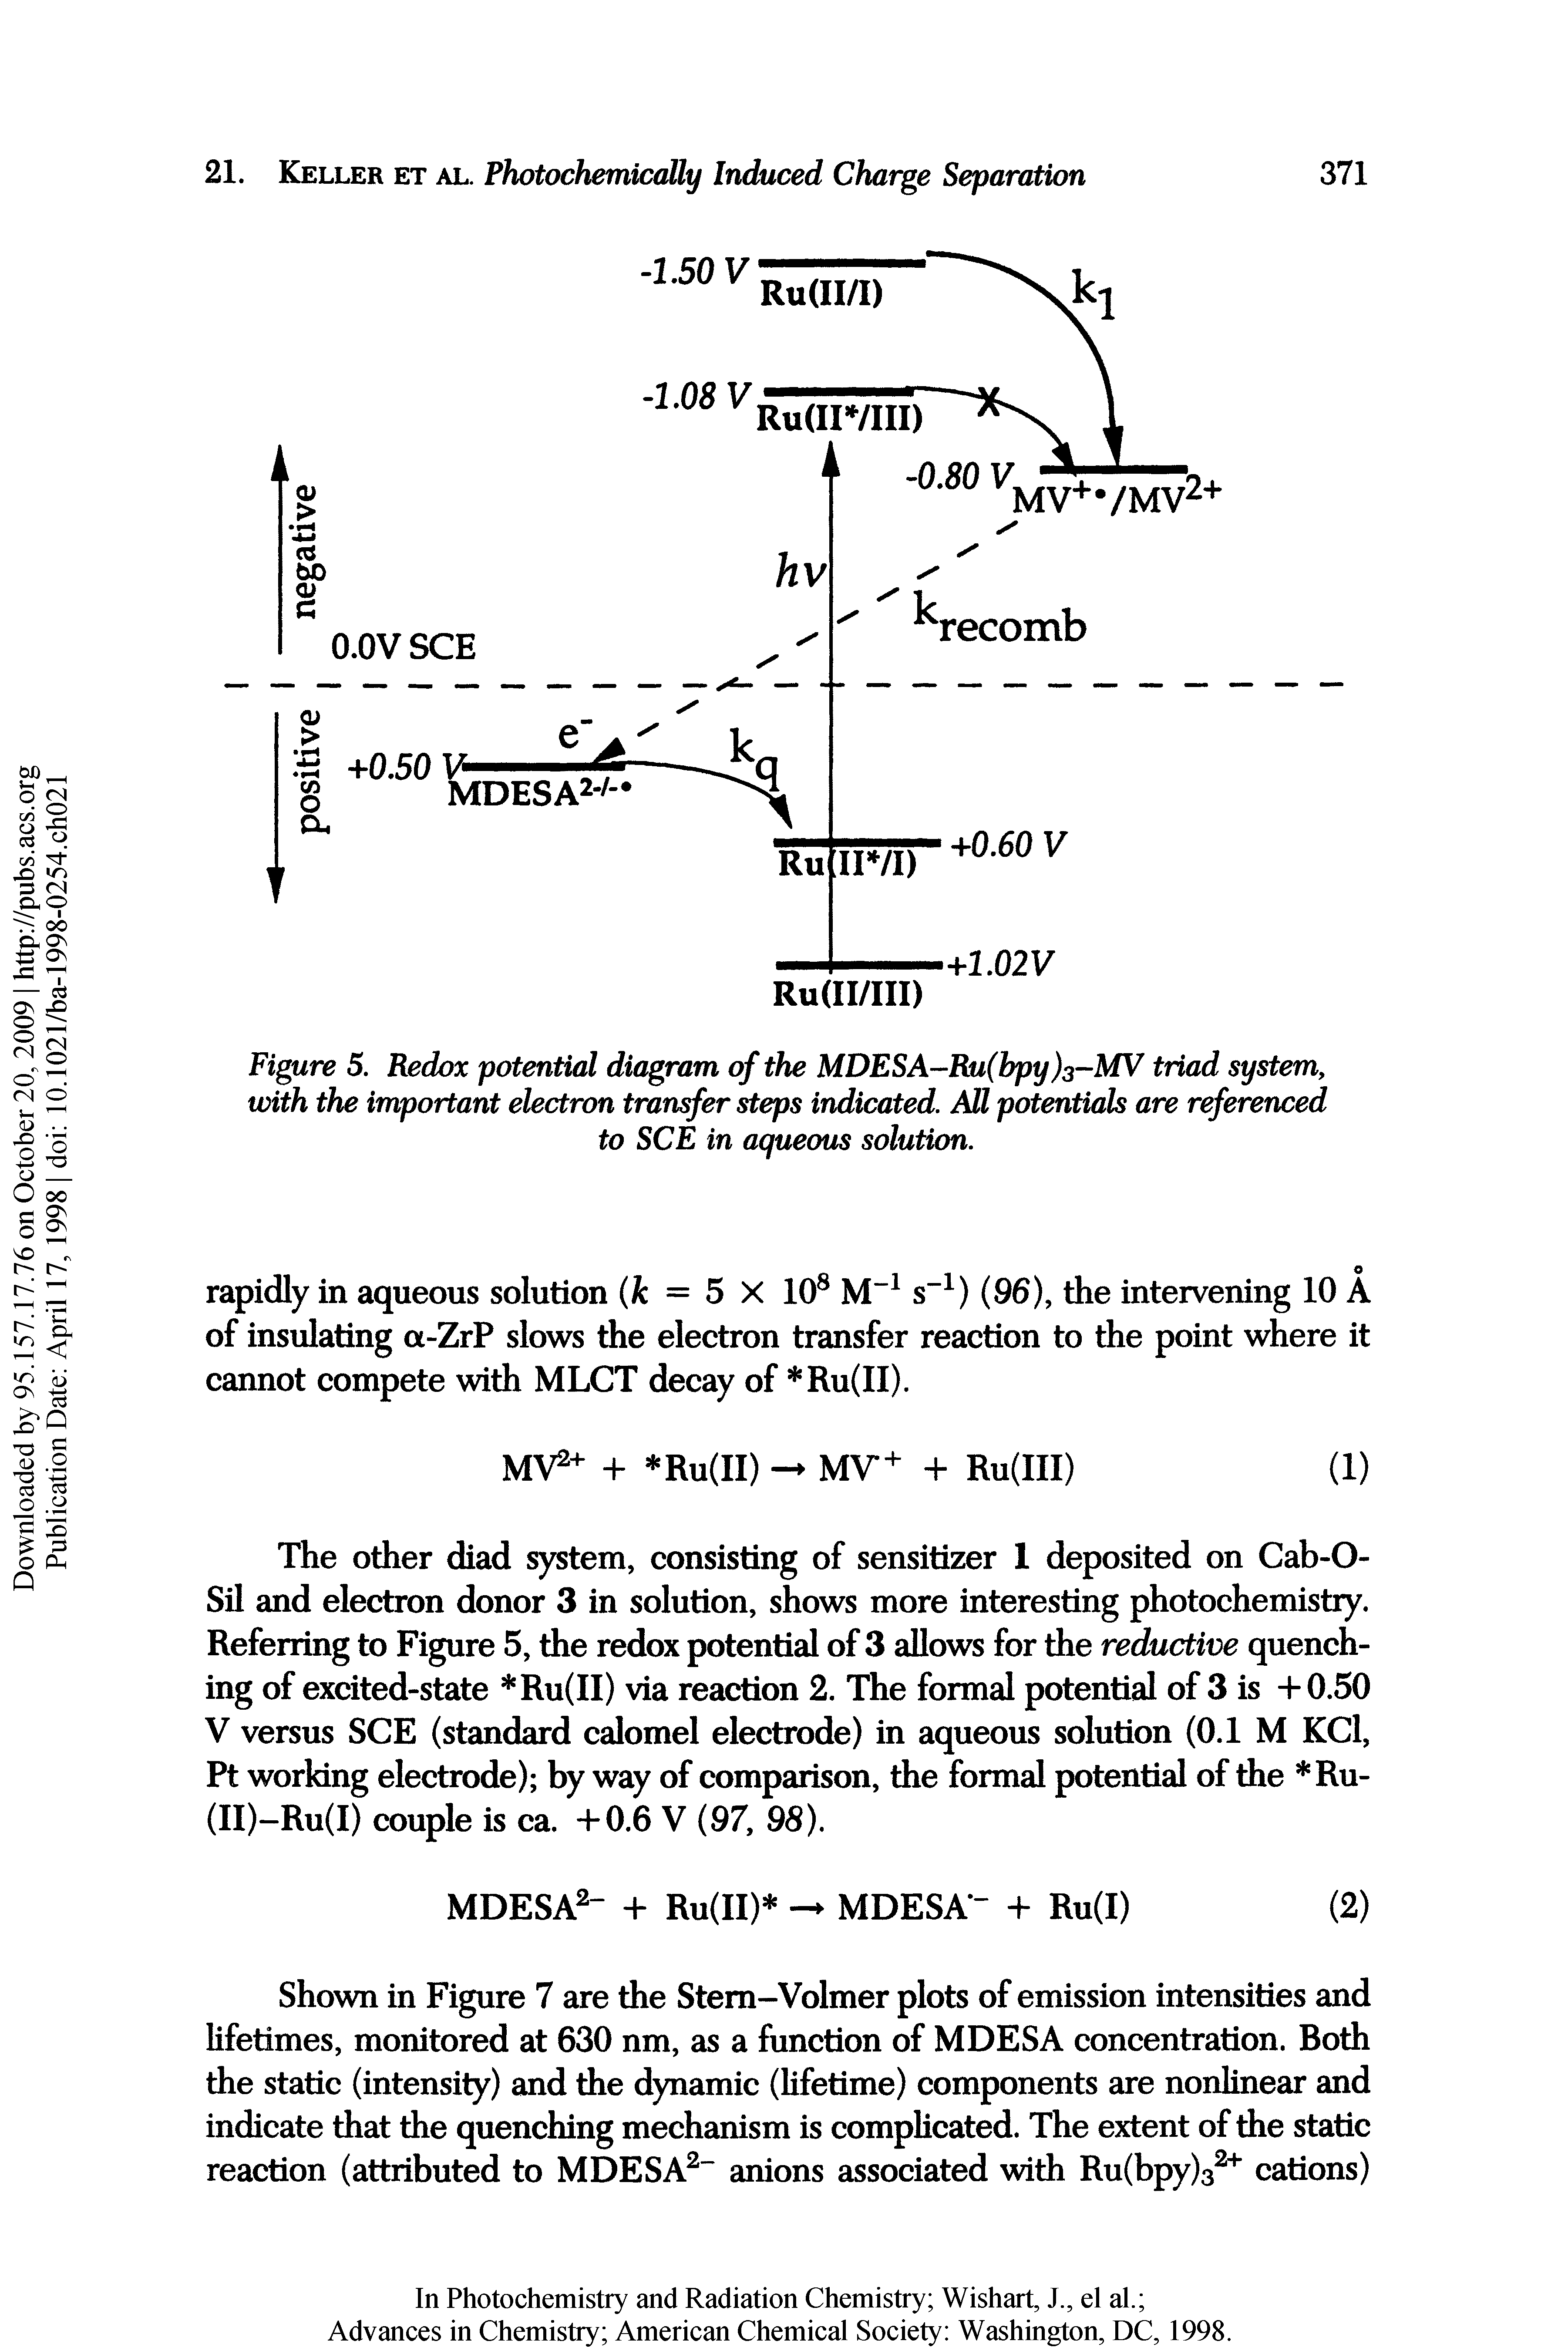 Figure 5. Redox potential diagram of the MDESA-Ru(bpy)3-MV triad system, with the important electron transfer steps indicated. All potentials are referenced to SCE in aqueous solution.